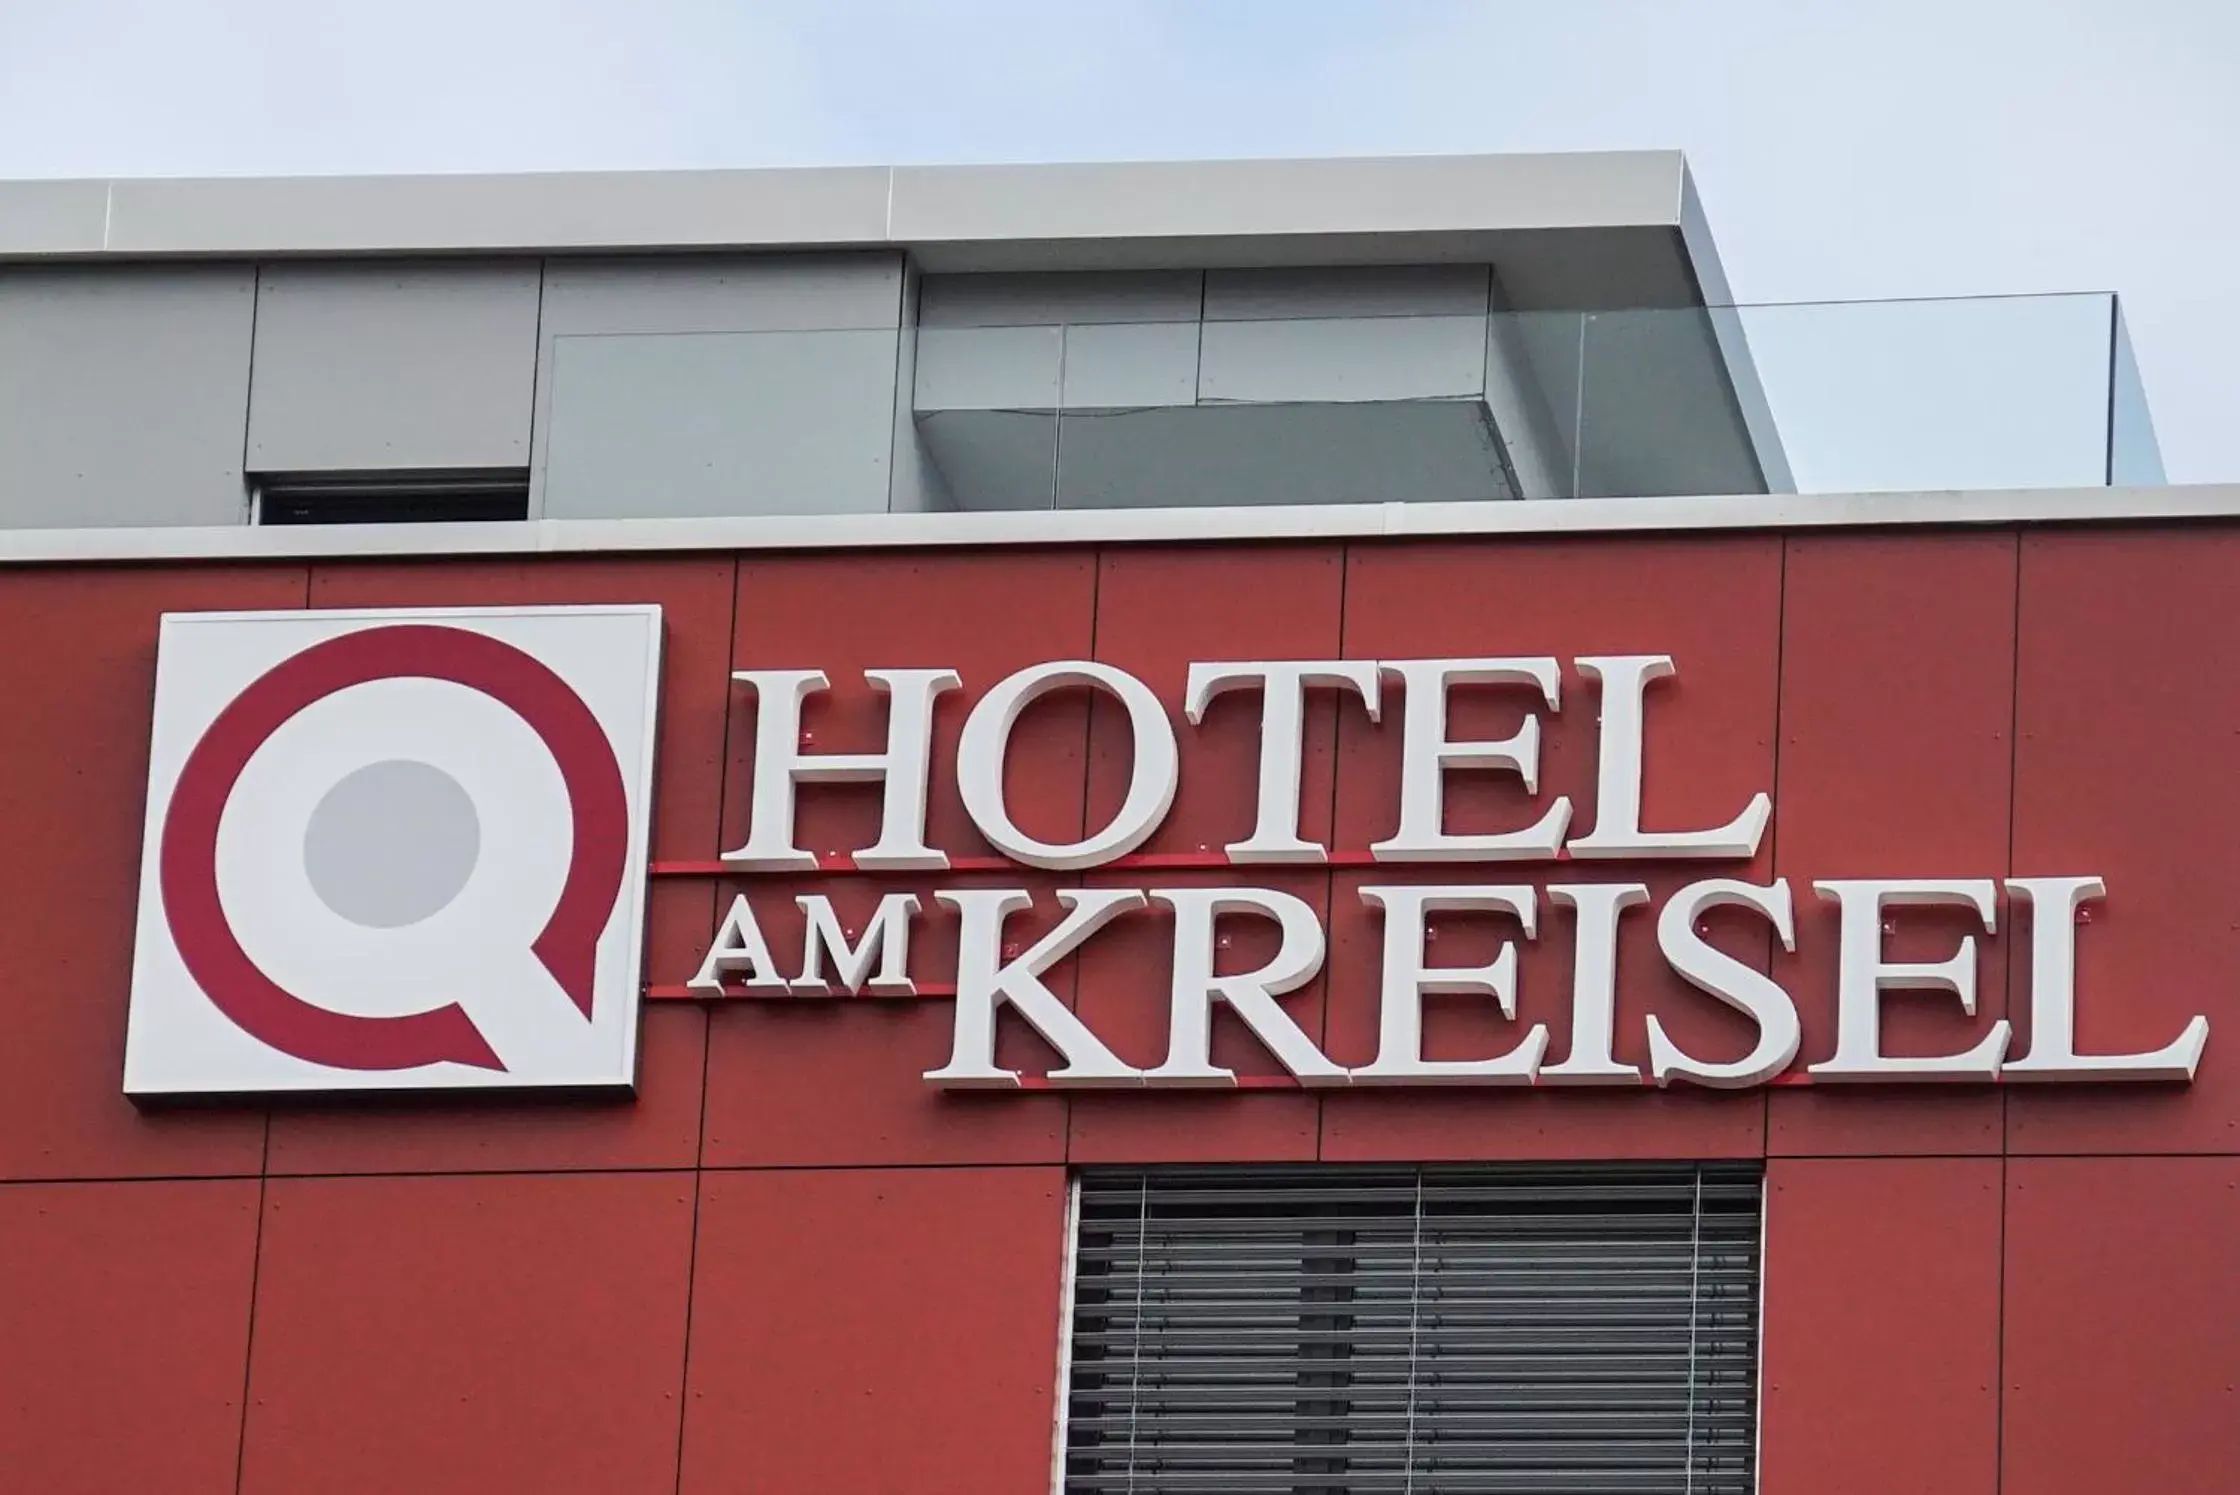 Day, Property Logo/Sign in Hotel am Kreisel: Self-Service Check-In Hotel